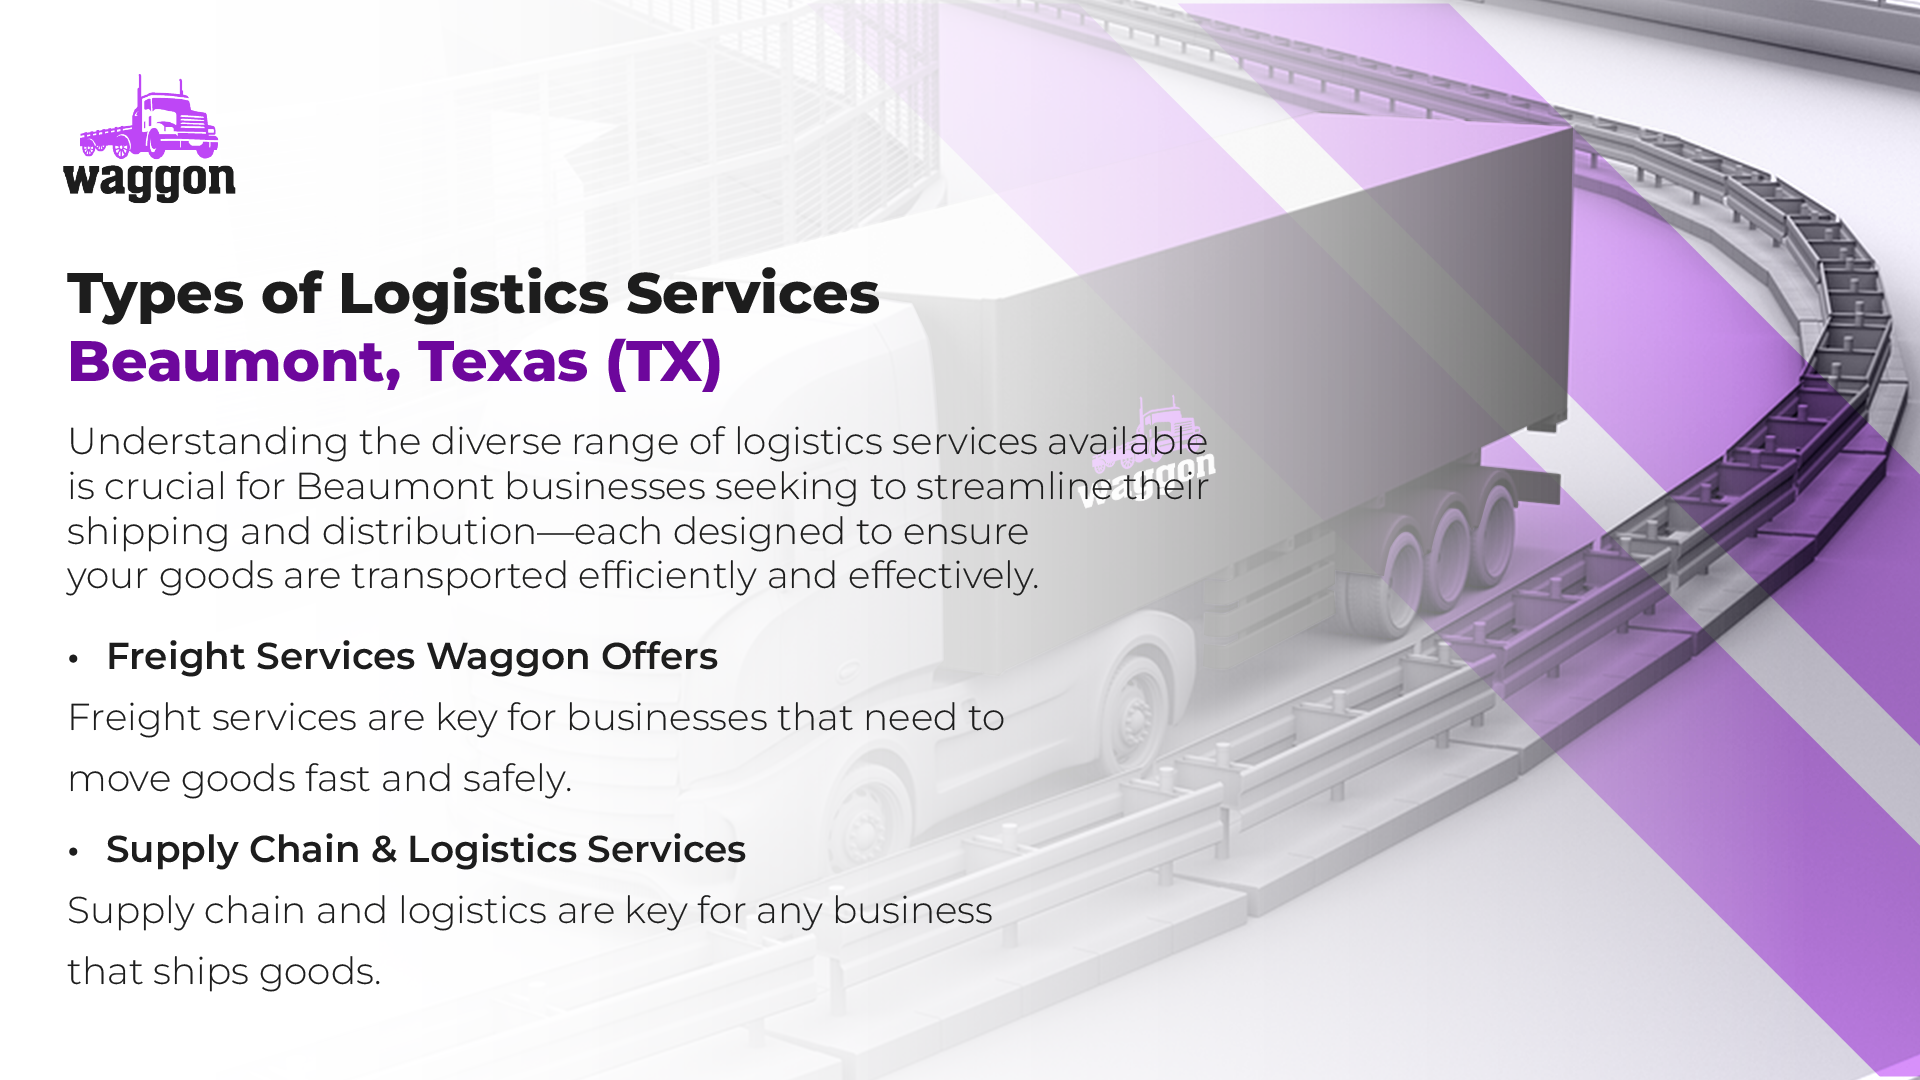 Types of Logistics Services in Beaumont, Texas (TX)